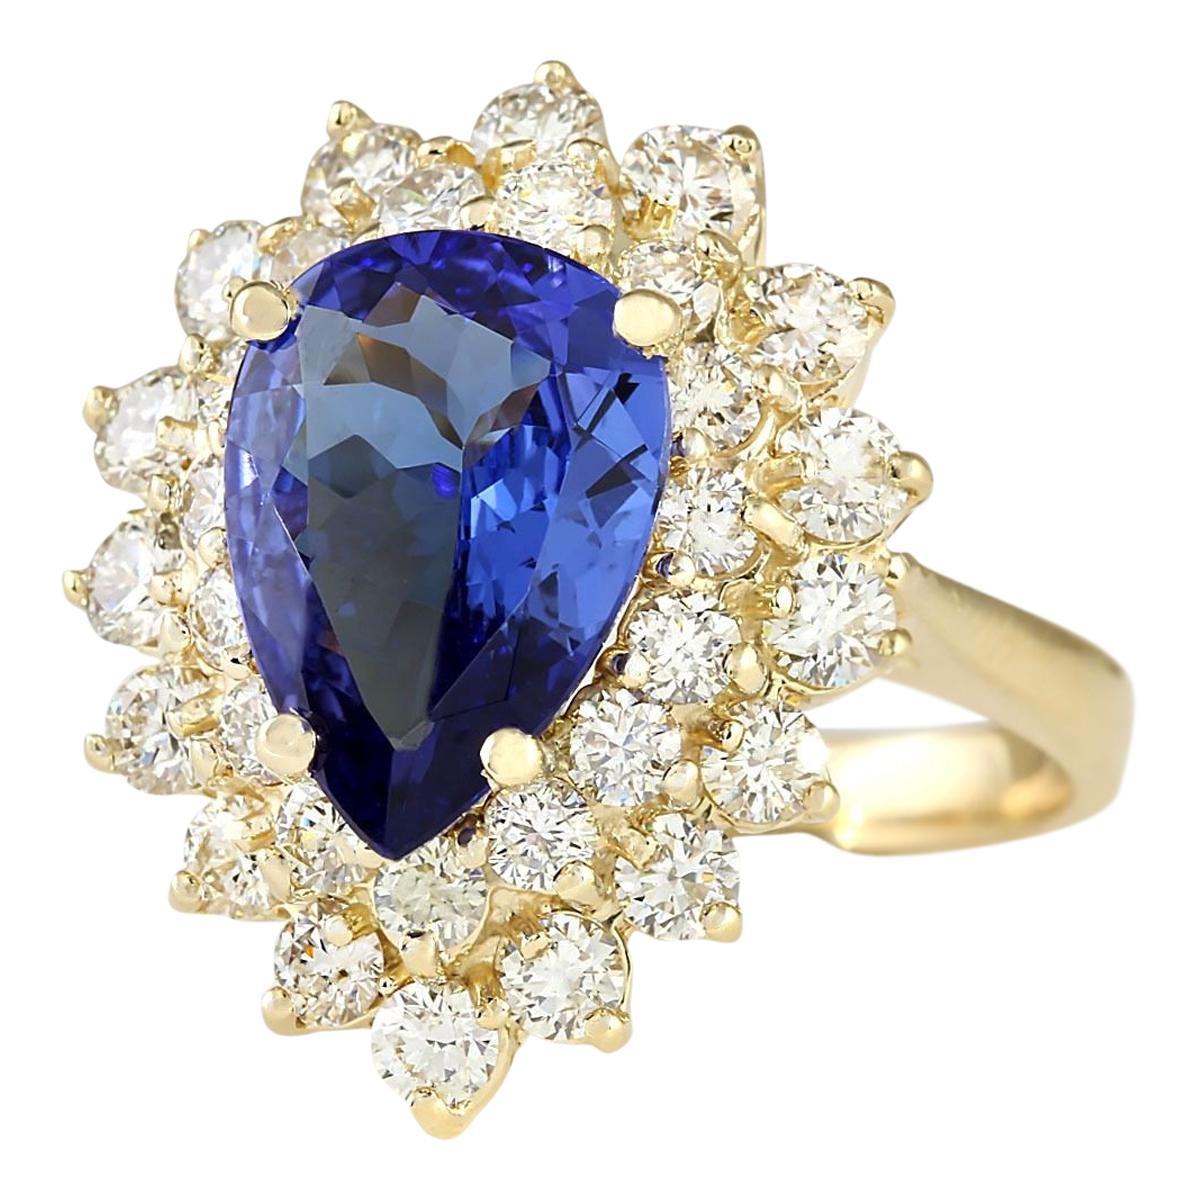 Introducing our stunning 4.73 Carat Natural Tanzanite 14 Karat Yellow Gold Diamond Ring. Crafted from luxurious 14K yellow gold, this ring is stamped for authenticity and has a total weight of 7.2 grams. At its center is a captivating 3.08 carat